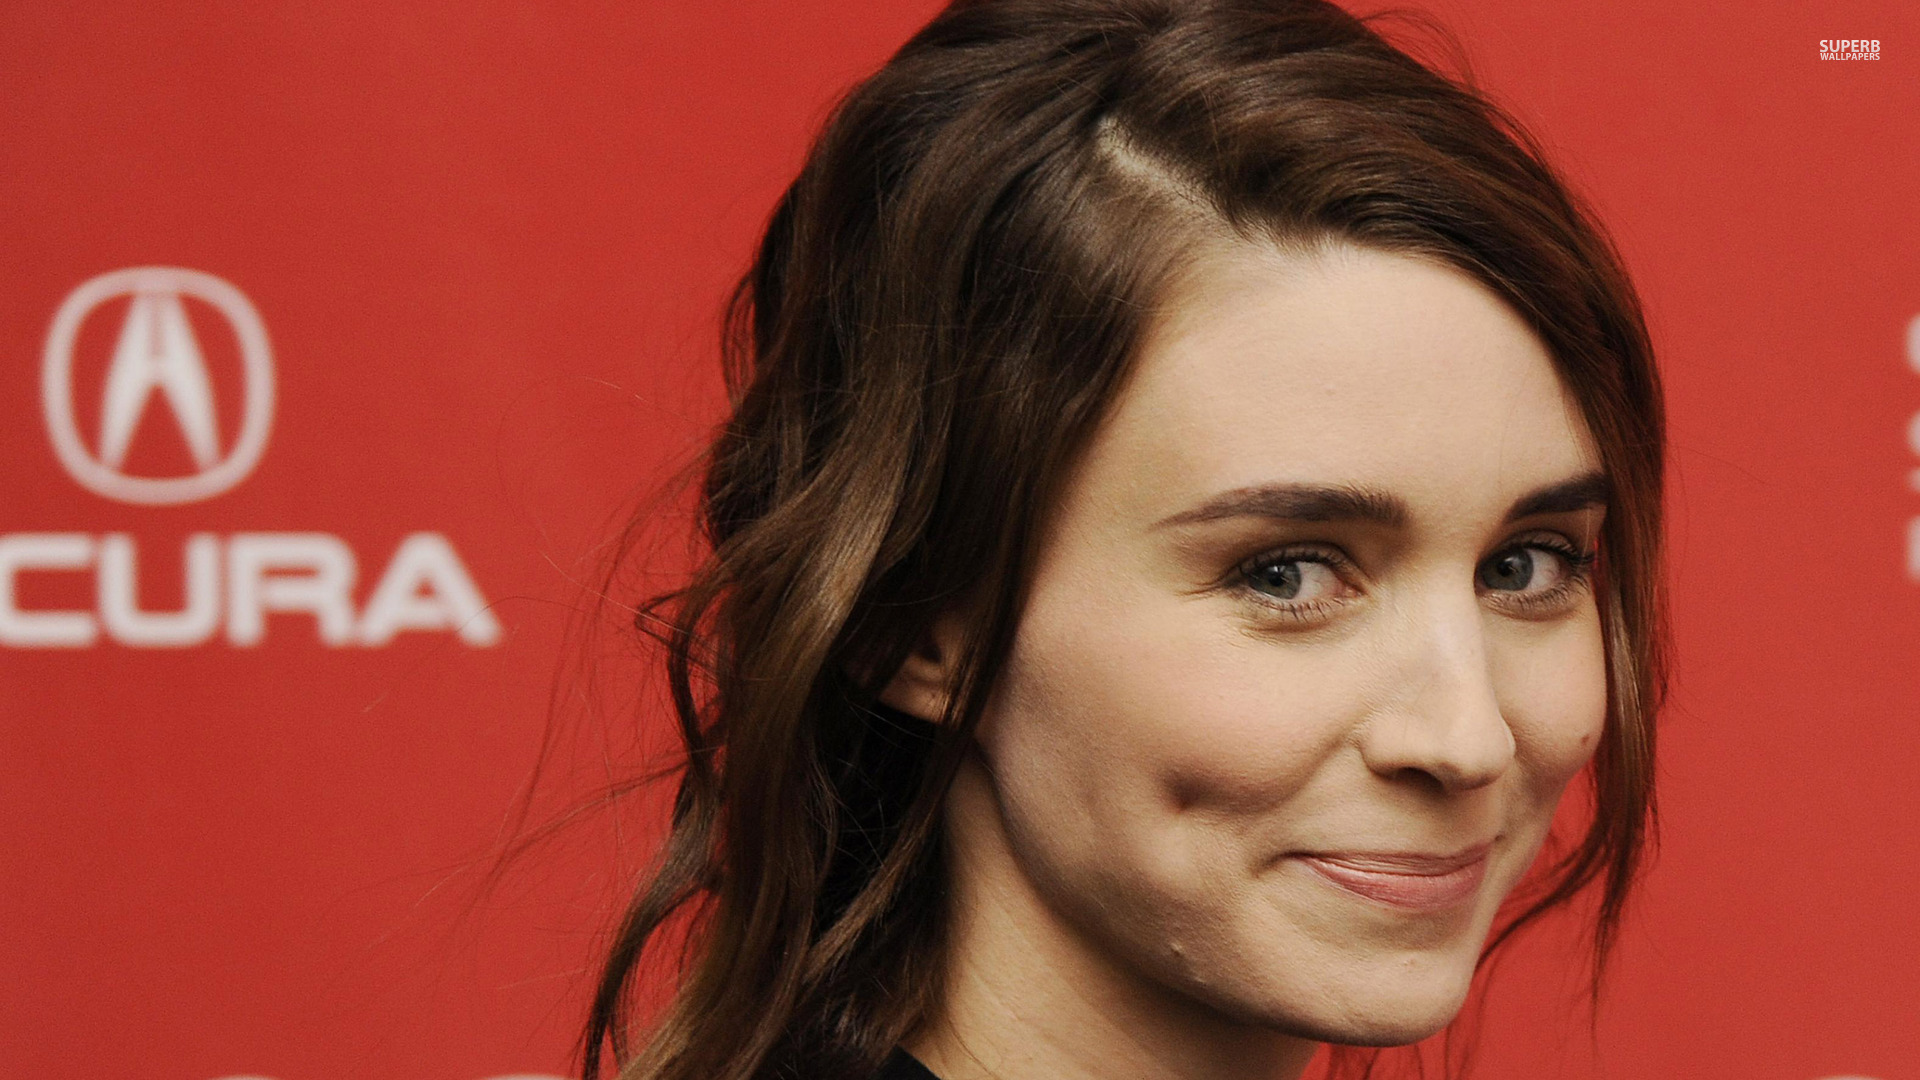 Rooney Mara Wallpaper High Resolution And Quality